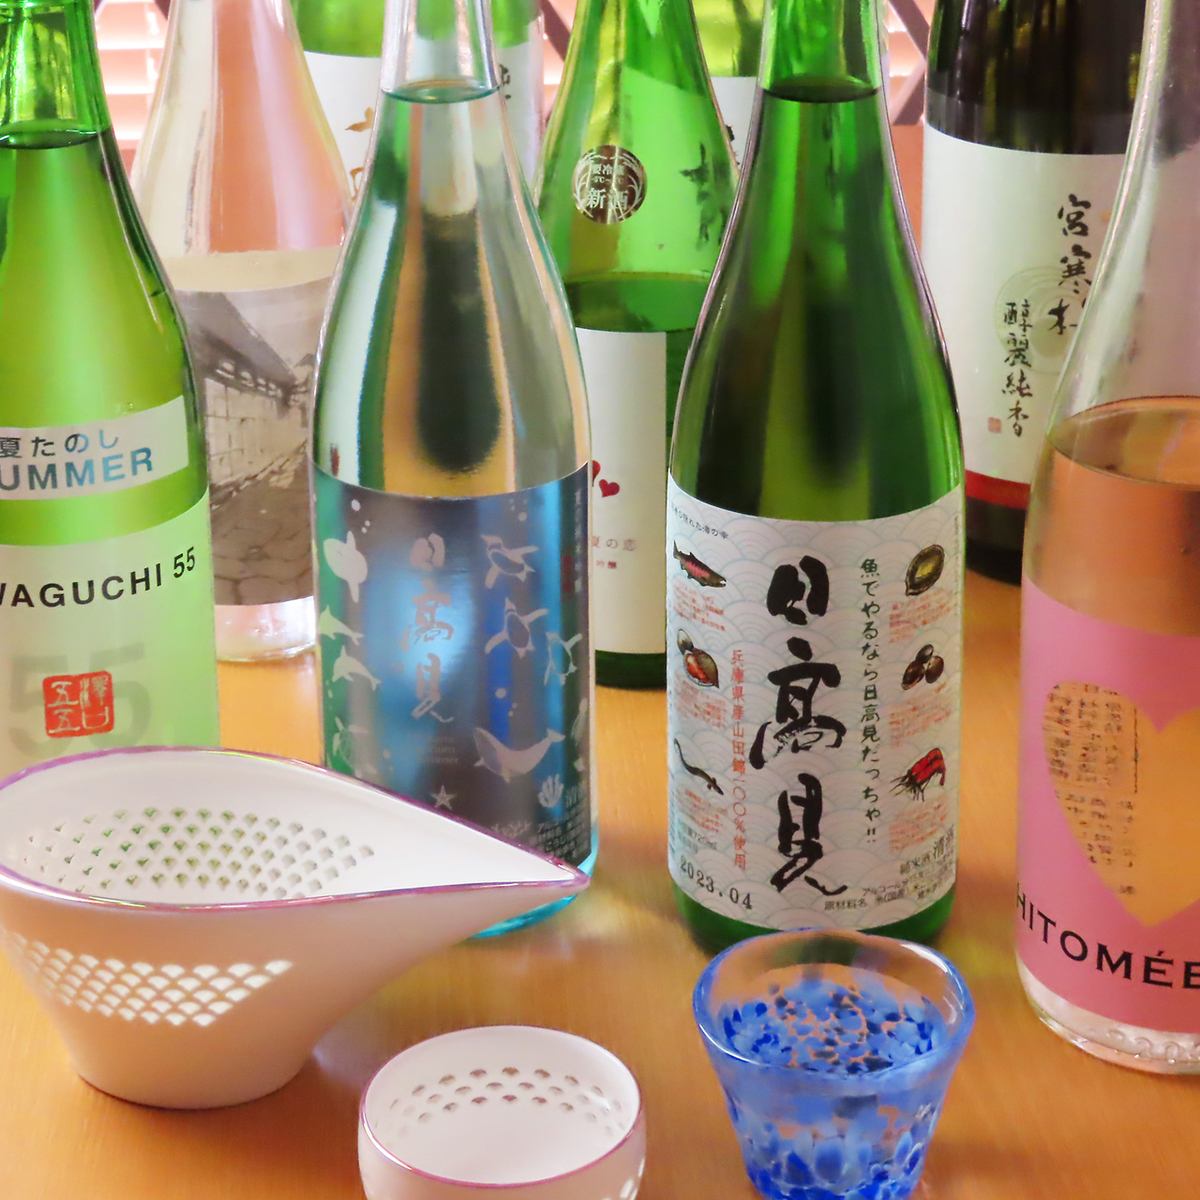 Please enjoy our specialty dishes with Japanese sake or shochu.